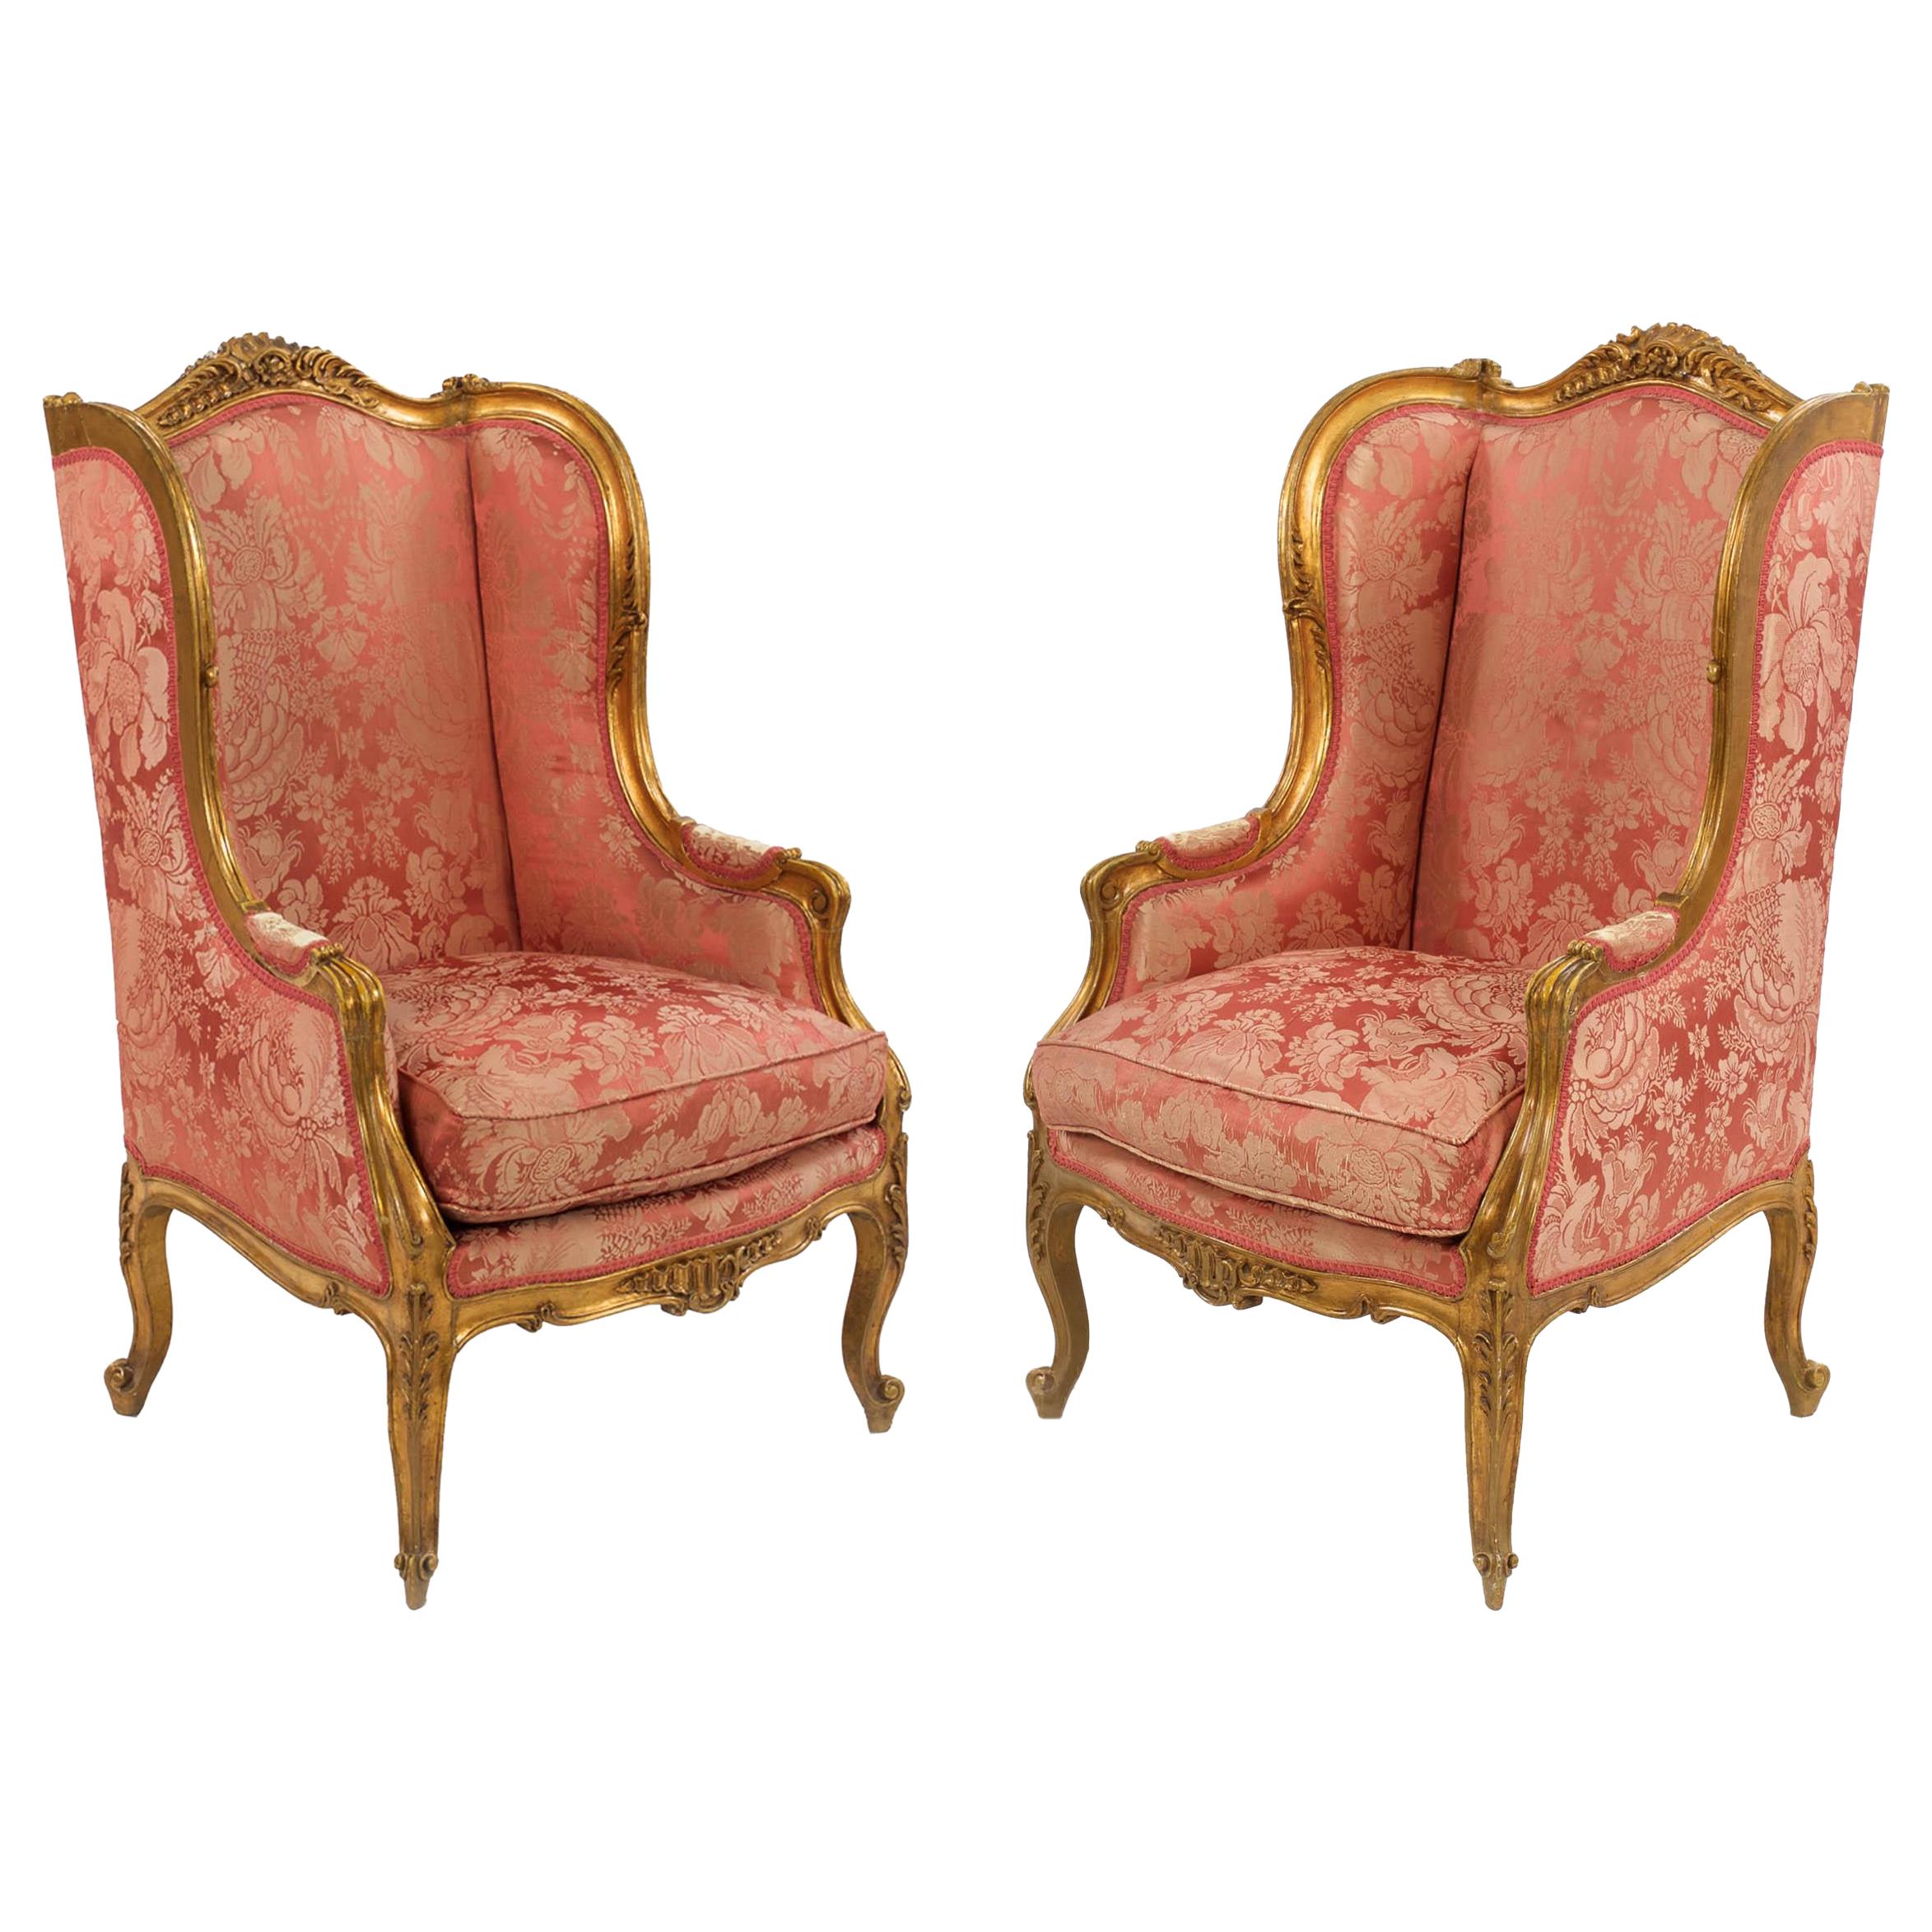 French Louis XV Style Arm Chair, 88% Off